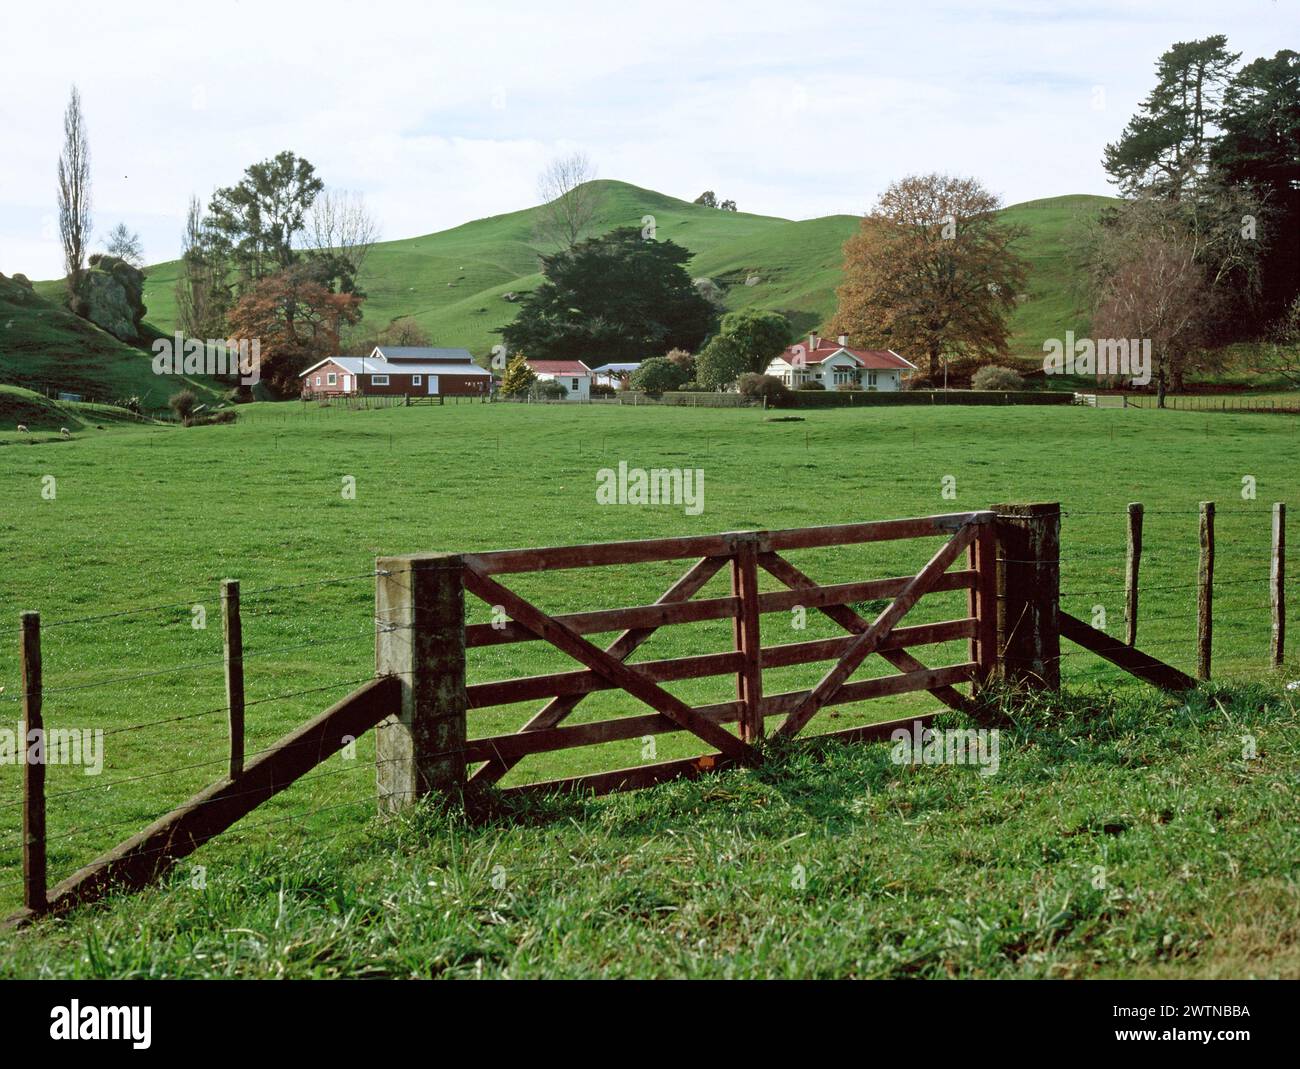 New Zealand. Wooden gate to field with farm homestead. Stock Photo